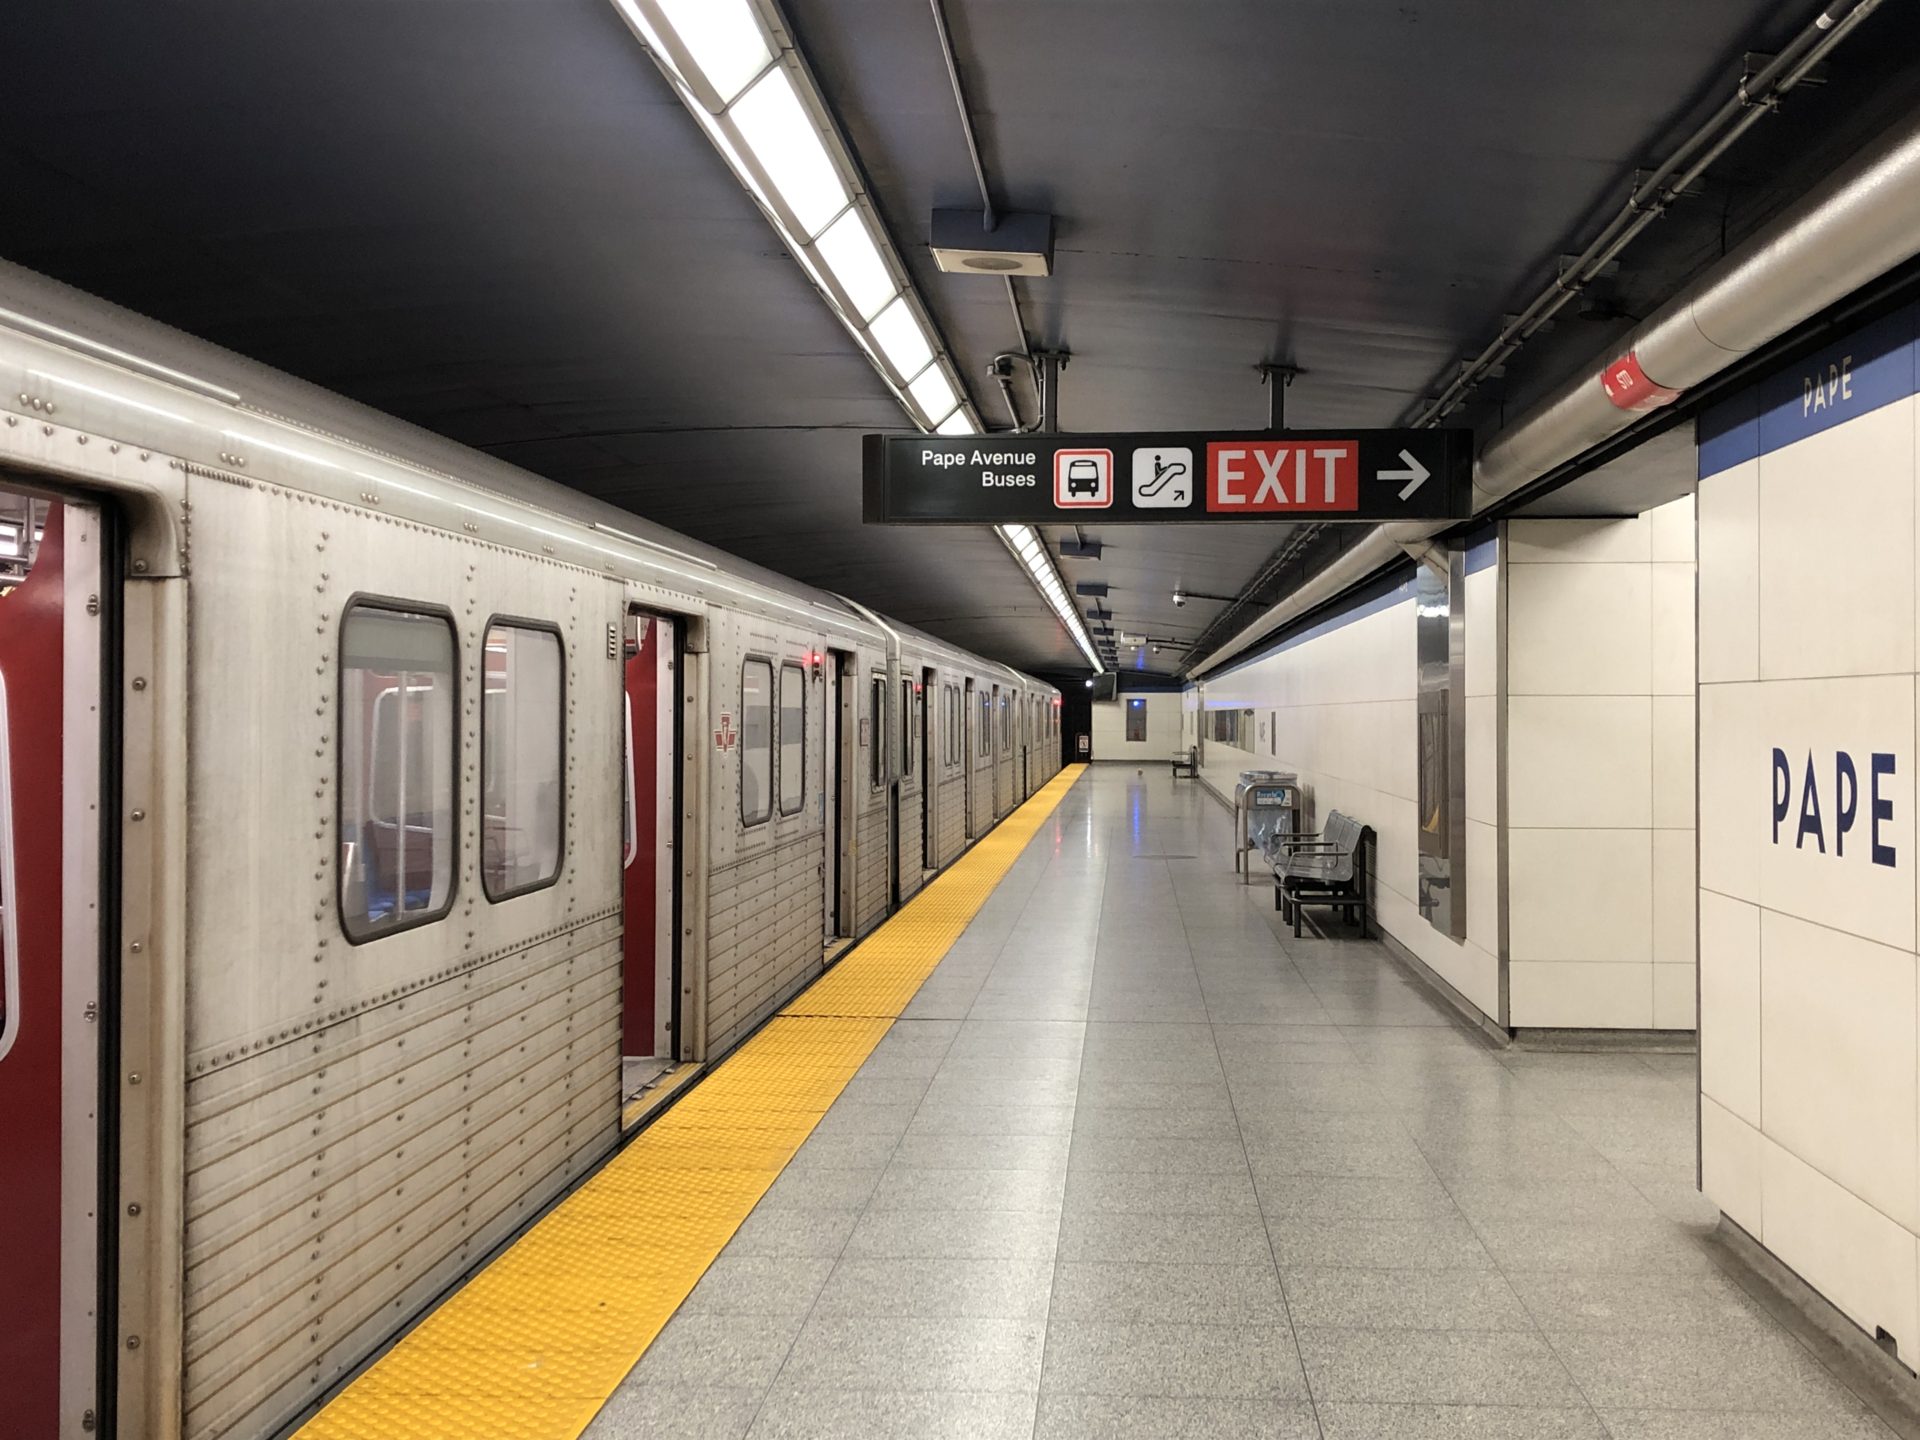 A subway train is parked at Pape station in East York the day before a major transit announcement by the Ontario Government.